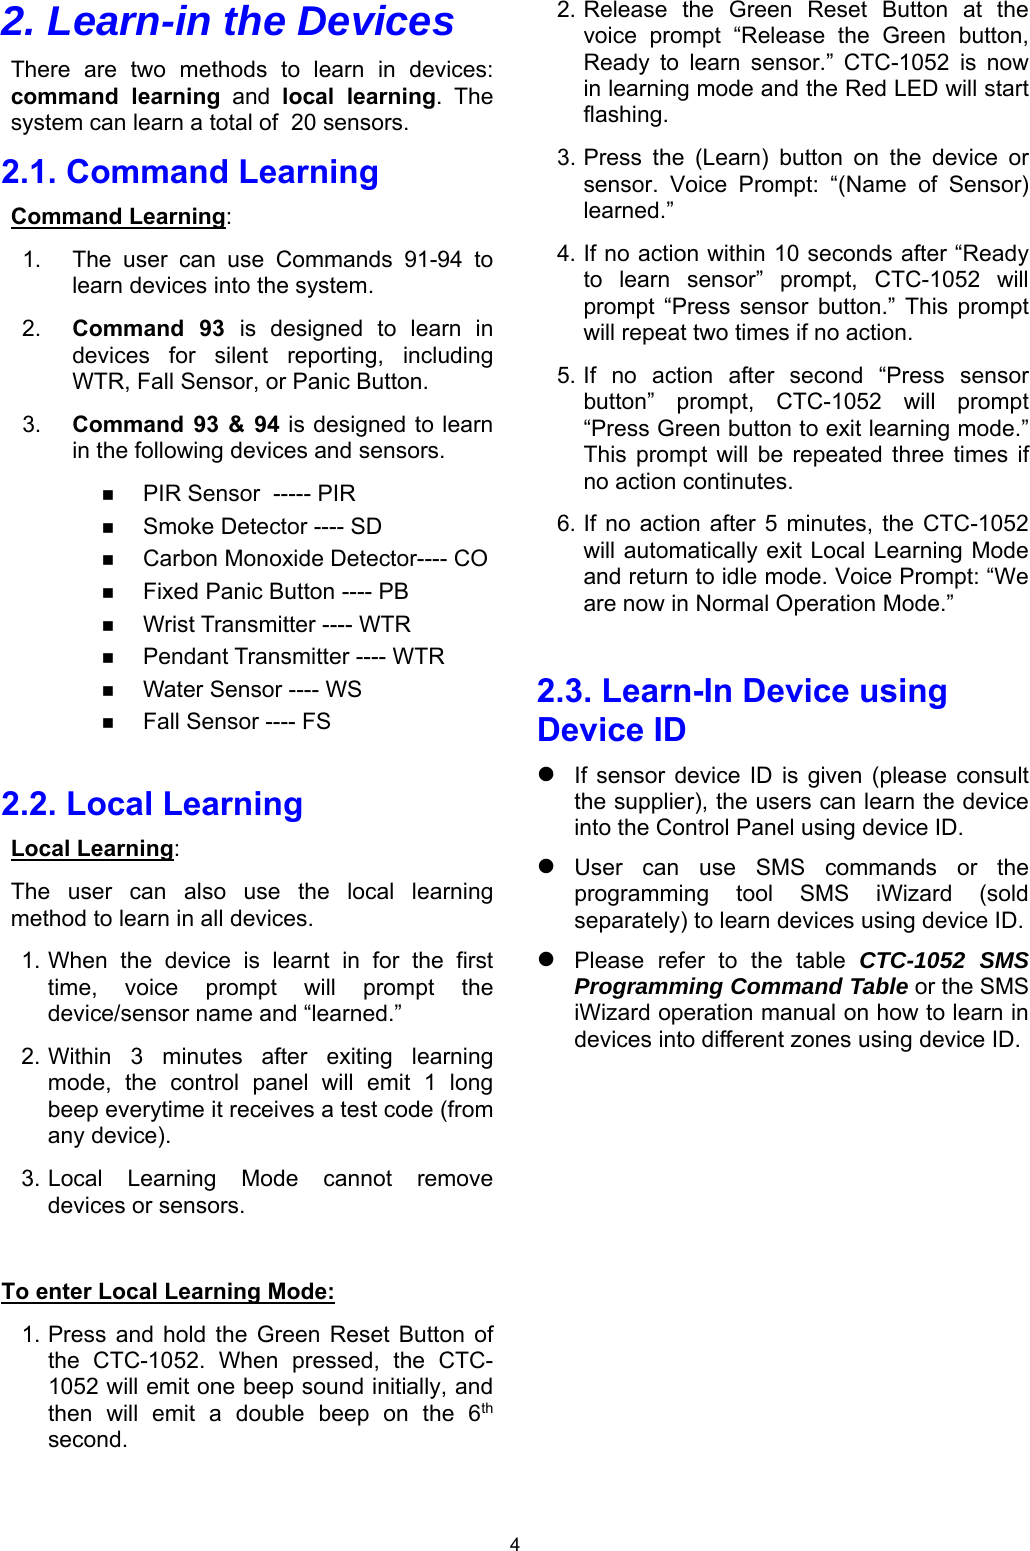 4 2. Learn-in the Devices There  are  two  methods  to  learn  in  devices: command  learning  and  local  learning.  The system can learn a total of  20 sensors. 2.1. Command Learning Command Learning:  1.  The  user  can  use  Commands  91-94  to learn devices into the system. 2.  Command  93  is  designed  to  learn  in devices  for  silent  reporting,  including WTR, Fall Sensor, or Panic Button.  3.  Command  93  &amp;  94 is designed to learn in the following devices and sensors.   PIR Sensor  ----- PIR  Smoke Detector ---- SD  Carbon Monoxide Detector---- CO  Fixed Panic Button ---- PB  Wrist Transmitter ---- WTR  Pendant Transmitter ---- WTR  Water Sensor ---- WS   Fall Sensor ---- FS  2.2. Local Learning Local Learning:  The  user  can  also  use  the  local  learning method to learn in all devices.  1. When  the  device  is  learnt  in  for  the  first time,  voice  prompt  will  prompt  the device/sensor name and “learned.”  2. Within  3  minutes  after  exiting  learning mode,  the  control  panel  will  emit  1  long beep everytime it receives a test code (from any device). 3. Local  Learning  Mode  cannot  remove devices or sensors.  To enter Local Learning Mode: 1. Press  and  hold  the  Green  Reset Button  of the  CTC-1052.  When  pressed,  the  CTC-1052 will emit one beep sound initially, and then  will  emit  a  double  beep  on  the  6th second.  2. Release  the  Green  Reset  Button  at  the voice  prompt  “Release  the  Green  button, Ready  to  learn  sensor.”  CTC-1052  is  now in learning mode and the Red LED will start flashing.  3. Press  the  (Learn)  button  on  the  device  or sensor.  Voice  Prompt:  “(Name  of  Sensor) learned.” 4. If no action within 10 seconds after “Ready to  learn  sensor”  prompt,  CTC-1052  will prompt  “Press  sensor  button.”  This  prompt will repeat two times if no action. 5. If  no  action  after  second  “Press  sensor button”  prompt,  CTC-1052  will  prompt “Press Green button to exit learning mode.” This  prompt  will be  repeated  three  times  if no action continutes.  6. If  no  action after  5 minutes,  the  CTC-1052 will automatically exit Local Learning Mode and return to idle mode. Voice Prompt: “We are now in Normal Operation Mode.”  2.3. Learn-In Device using Device ID  If  sensor  device  ID  is  given  (please  consult the supplier), the users can learn the device into the Control Panel using device ID.  User  can  use  SMS  commands  or  the programming  tool  SMS  iWizard  (sold separately) to learn devices using device ID.  Please  refer  to  the  table  CTC-1052 SMS Programming Command Table or the SMS iWizard operation manual on how to learn in devices into different zones using device ID.            